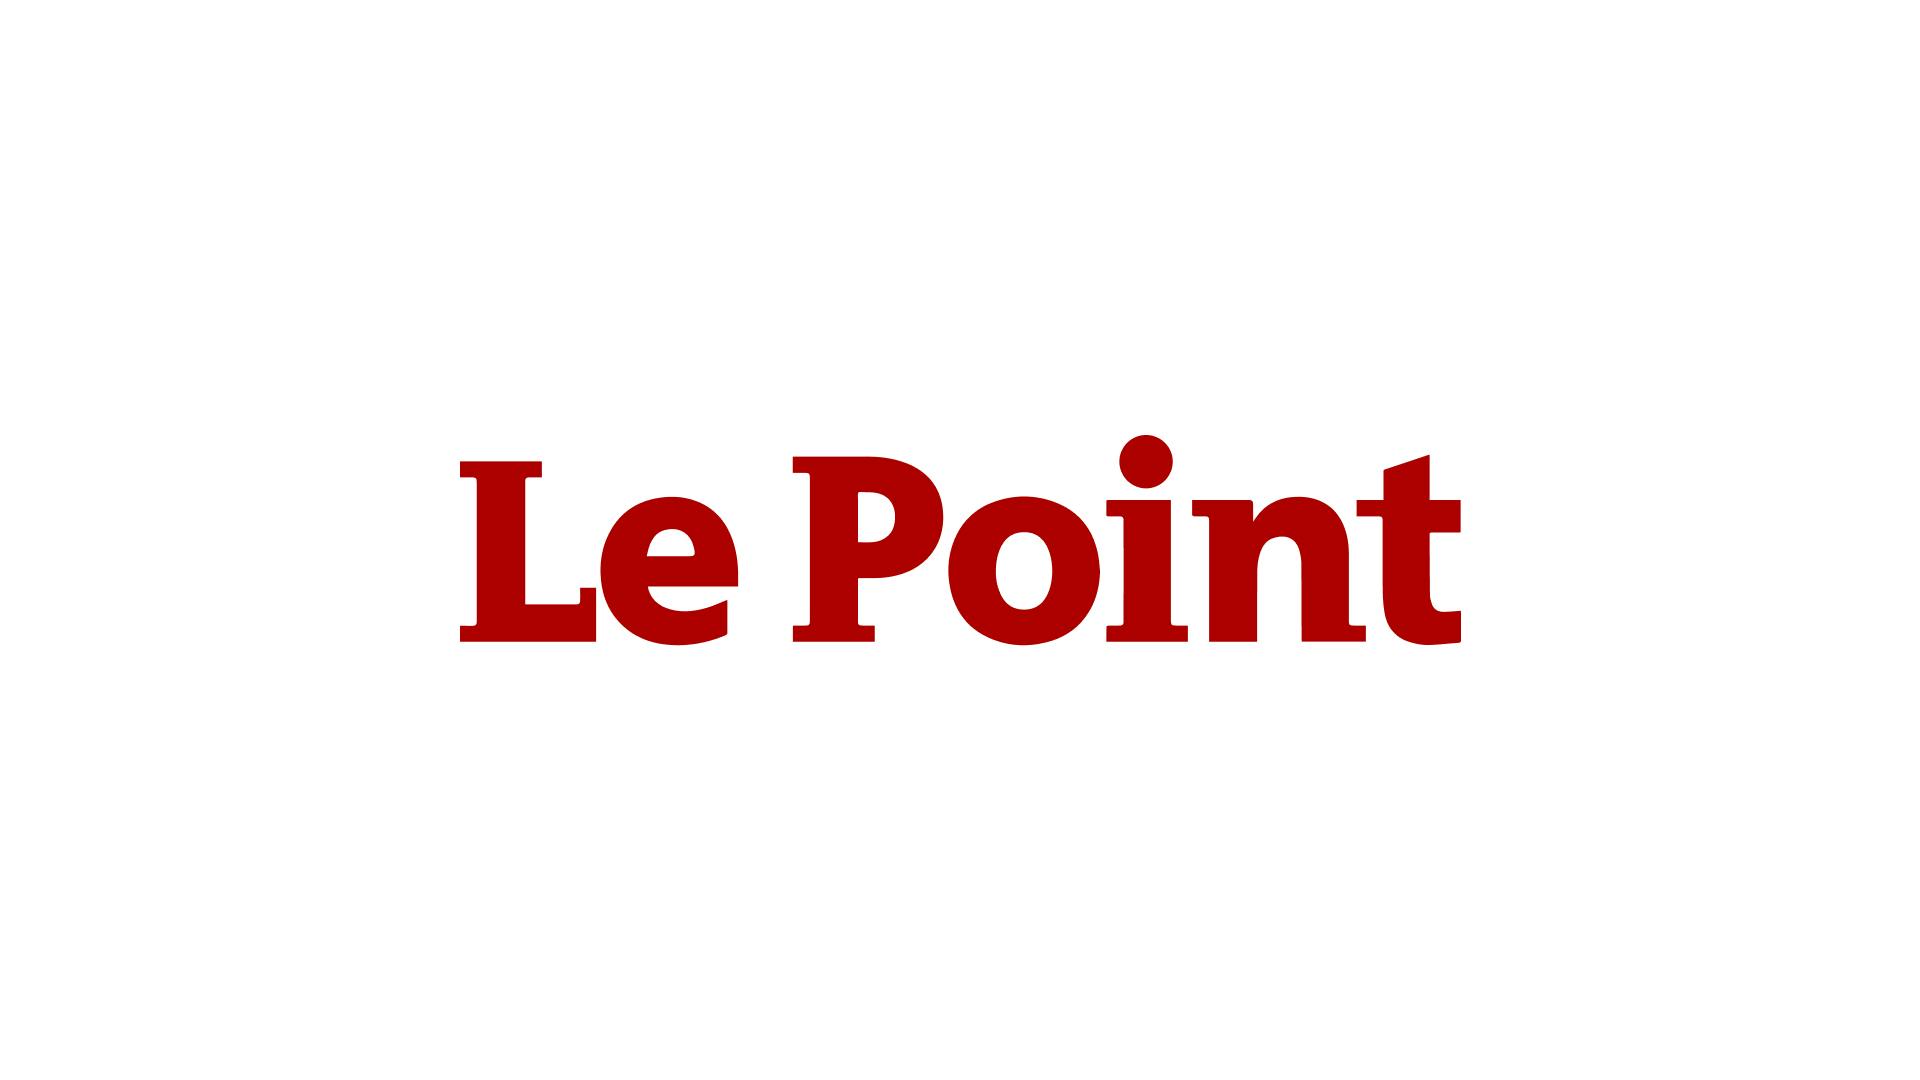 Le Point magazine Article - BeTomorrow- How to build the best digital innovation team?